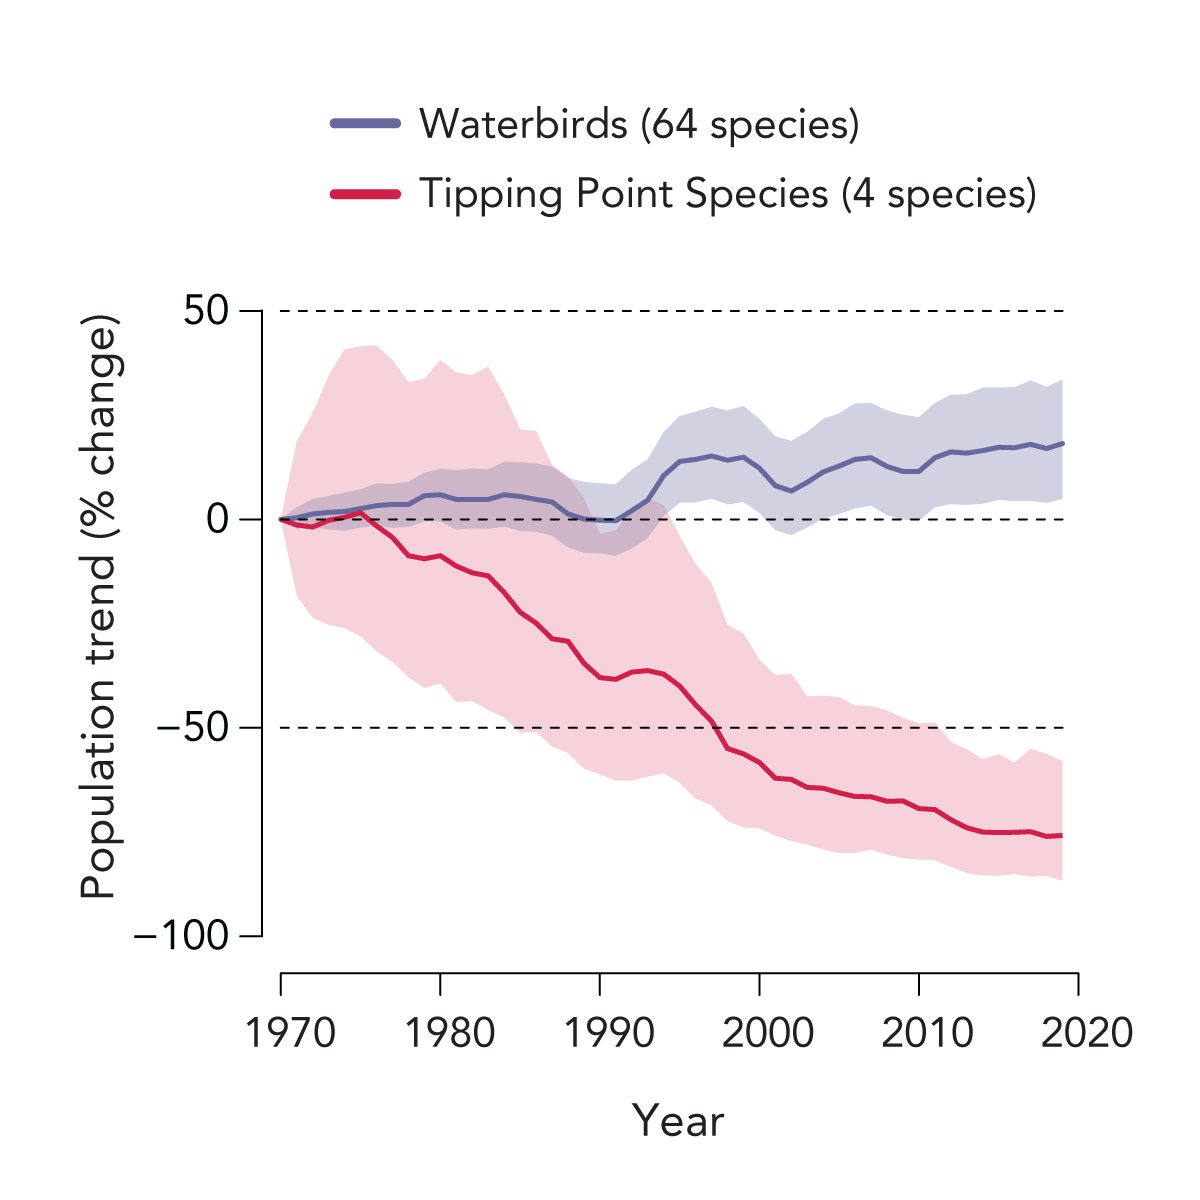 a graph showing slight increases in 64 species of waterbirds, purple line, and steep declines in 4 tipping point species, red line, since 1970